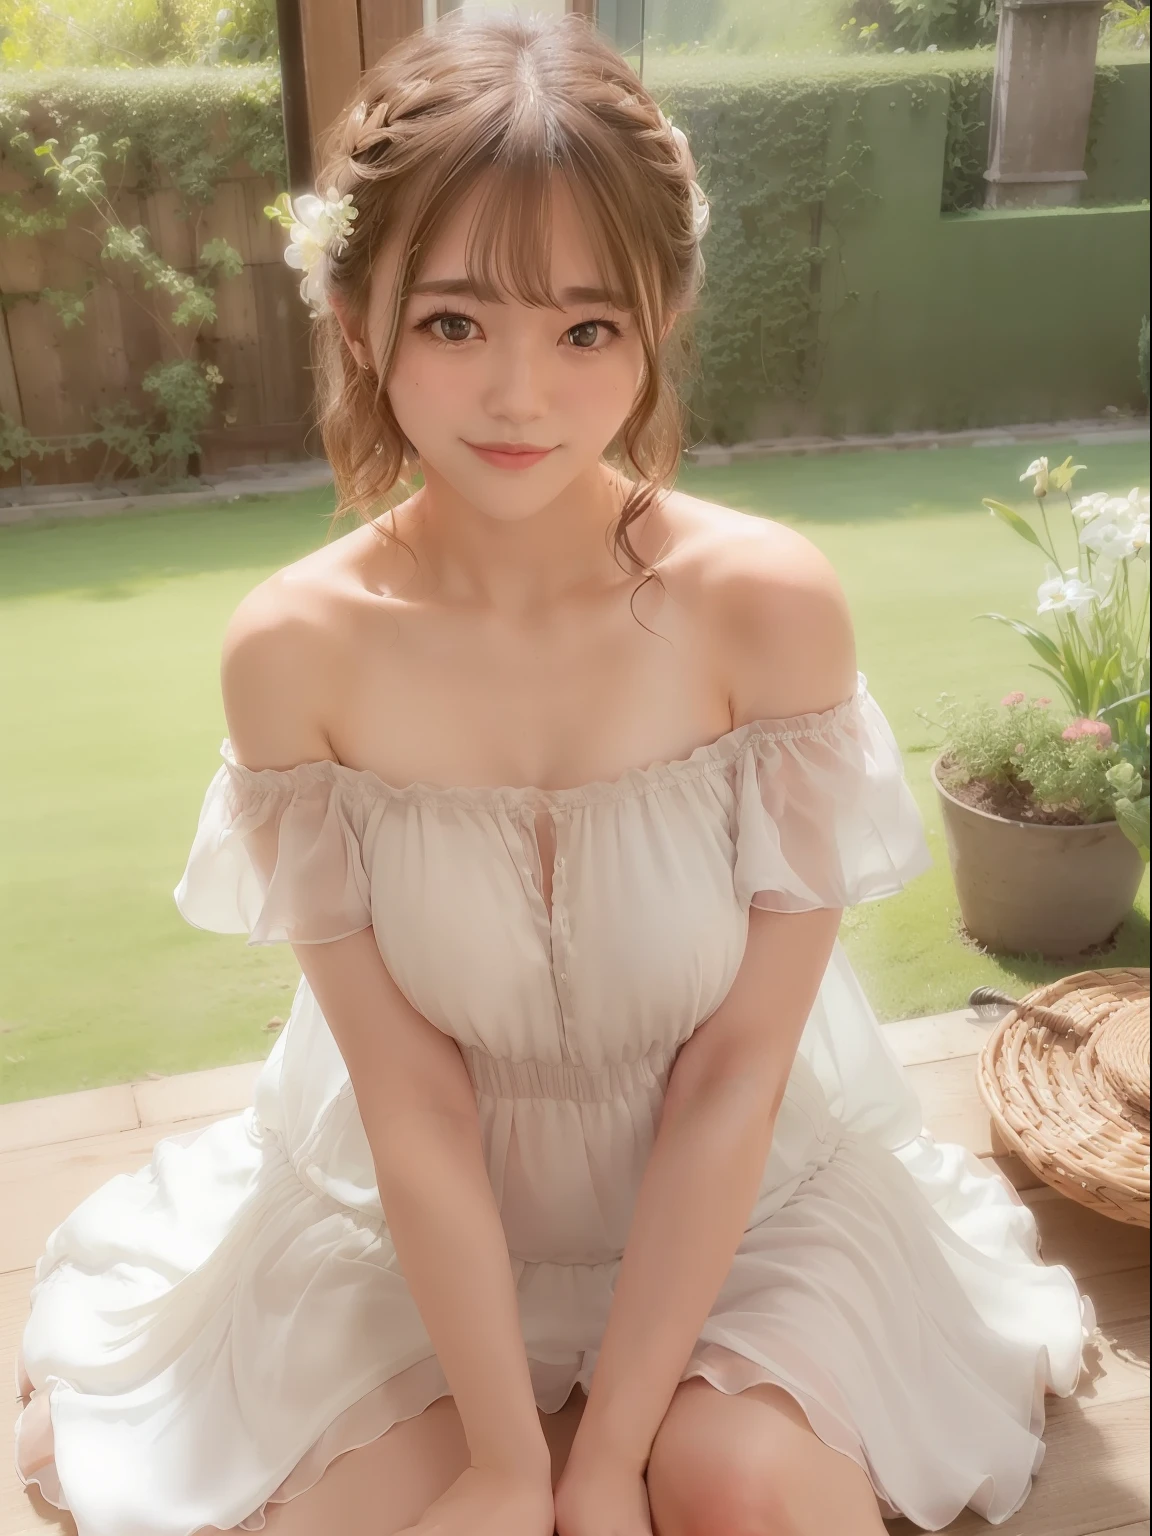 ((of the highest quality, 8K, masutepiece: 1.3, Raw photo)), Sharp Focus: 1.2, (1 AESPA Girl :1.1), (Solo: 1.2), (Realistic, Photorealistic: 1.37), (Face Focus: 1.1), Cute face, hyperdetailed face, huge-breasted, Breasts that are about to spill out, Short messy hair, Small Smile, (Off-the-shoulder chiffon dress:1.3), Sleeping Pose, garden, Glory lily